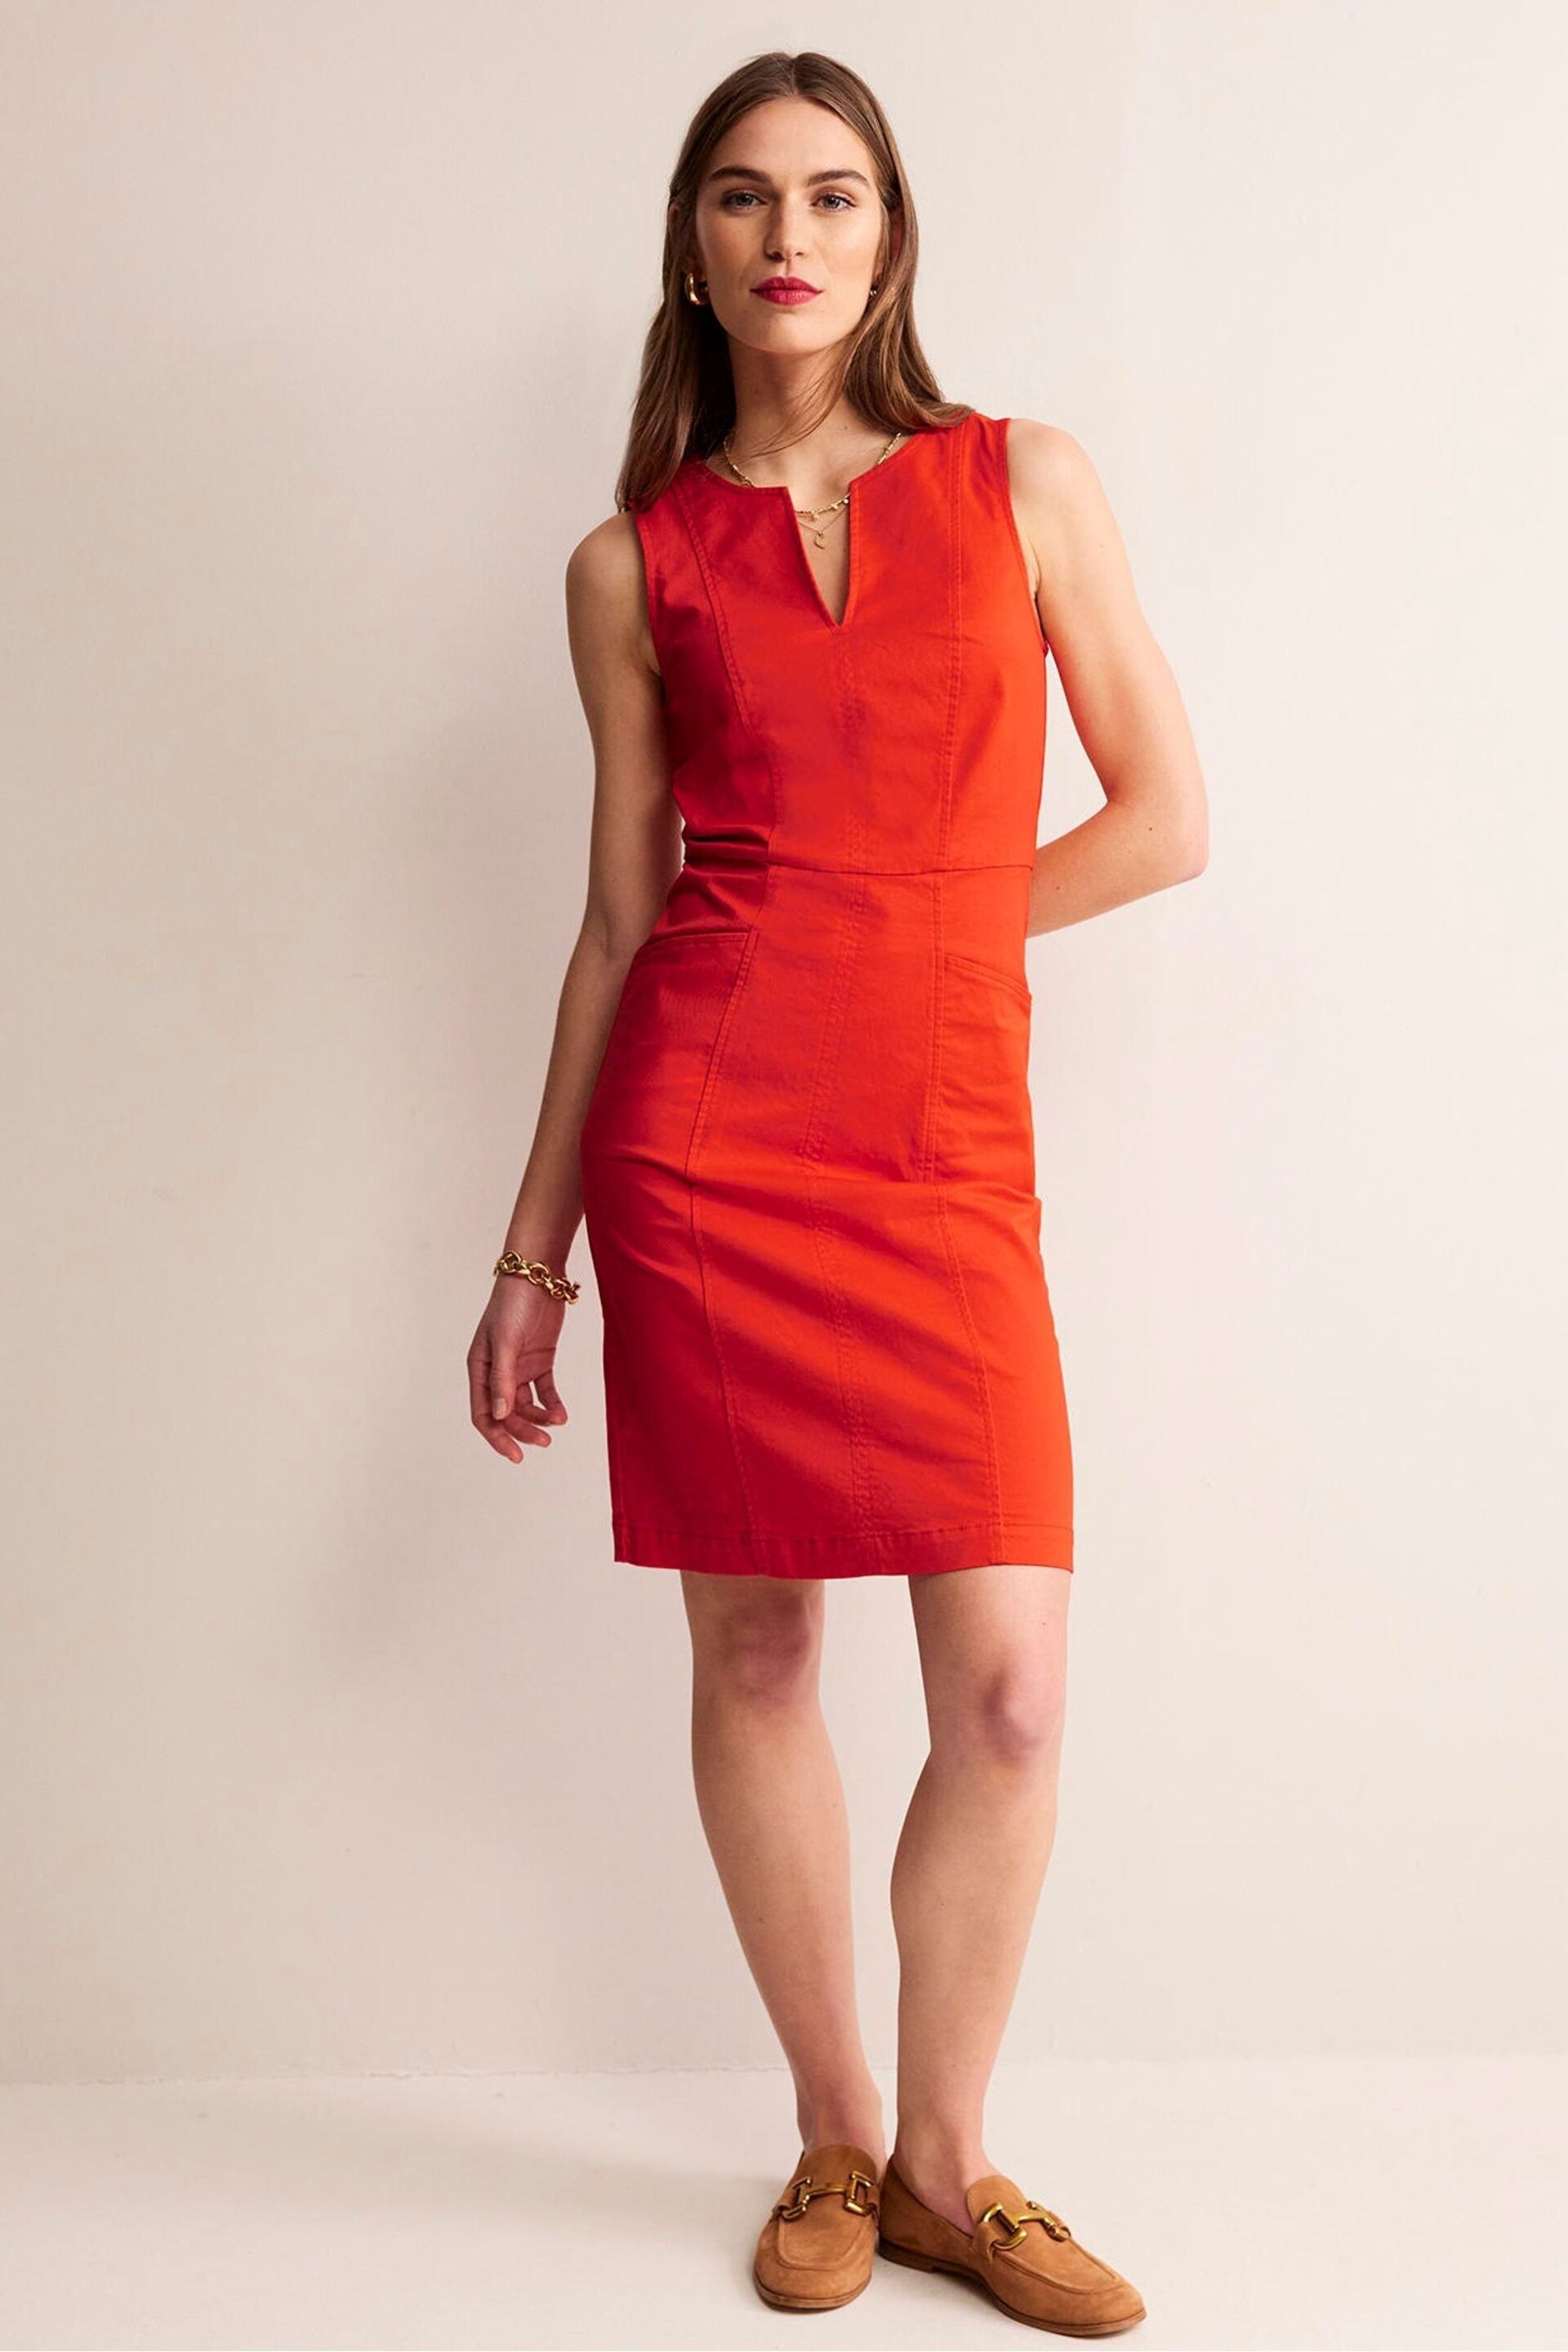 Boden Red Helena Chino Short Dress - Image 2 of 5